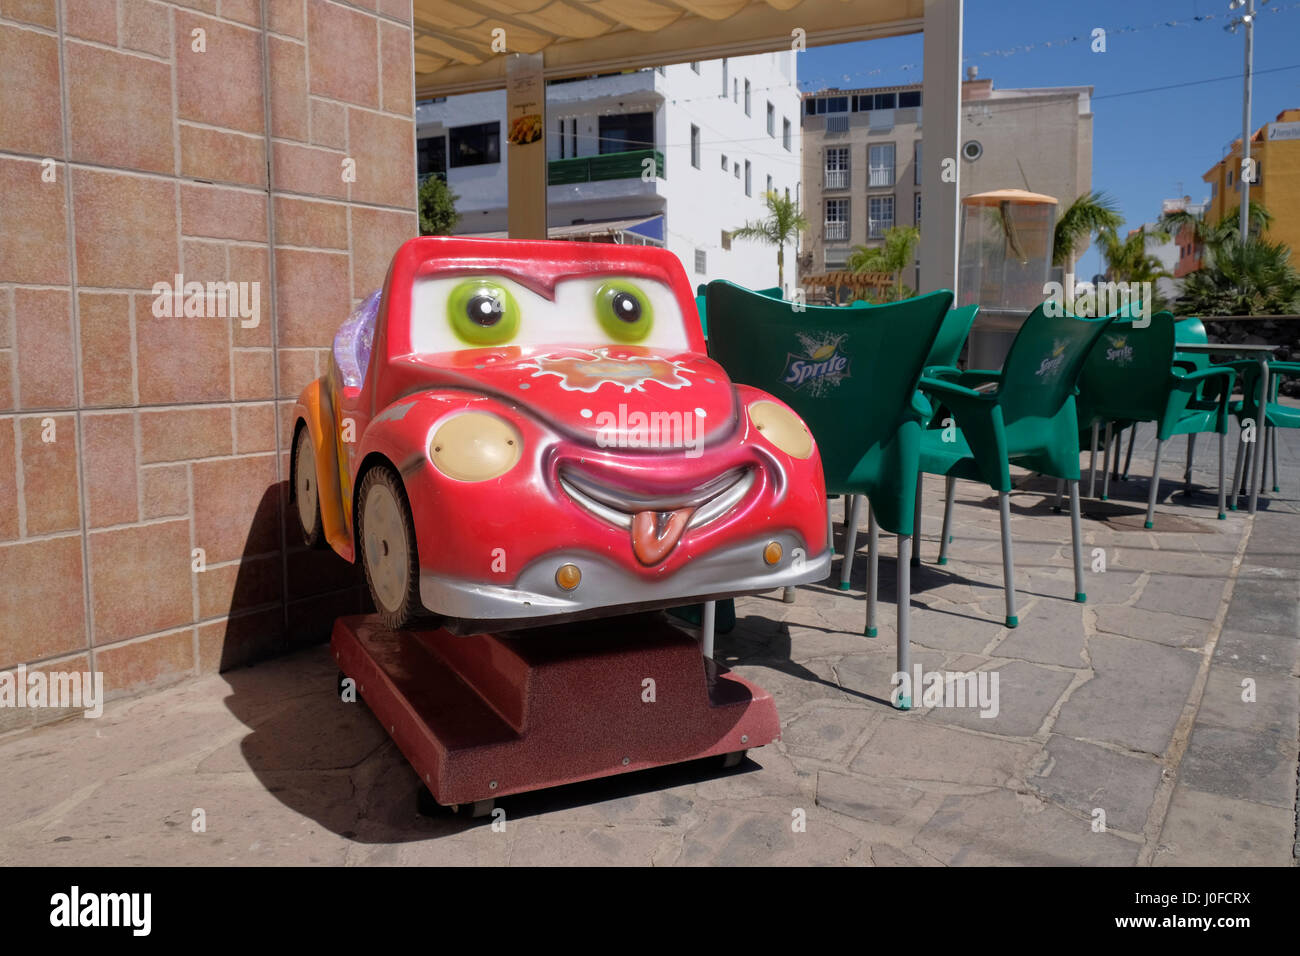 Children's coin-operated ride,Los Abrigos, Tenerife, Canary Islands, Spain. Stock Photo